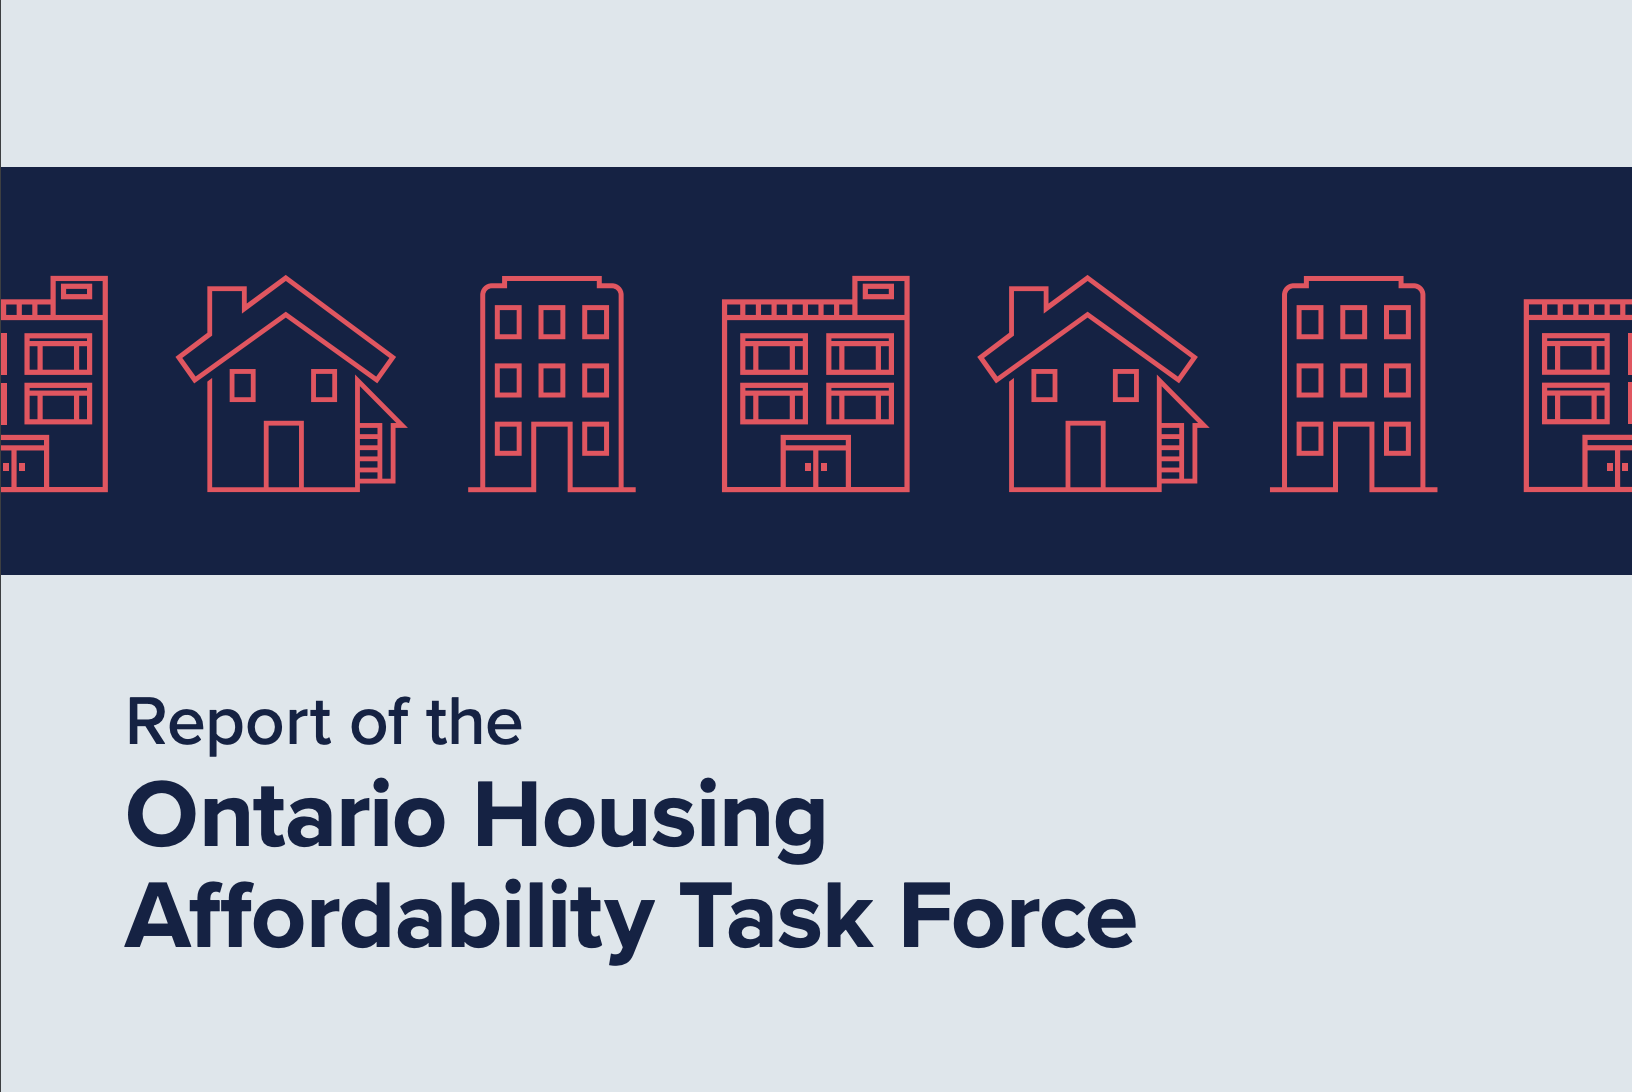 Press Release - Ontario Housing Affordability Task Force Report